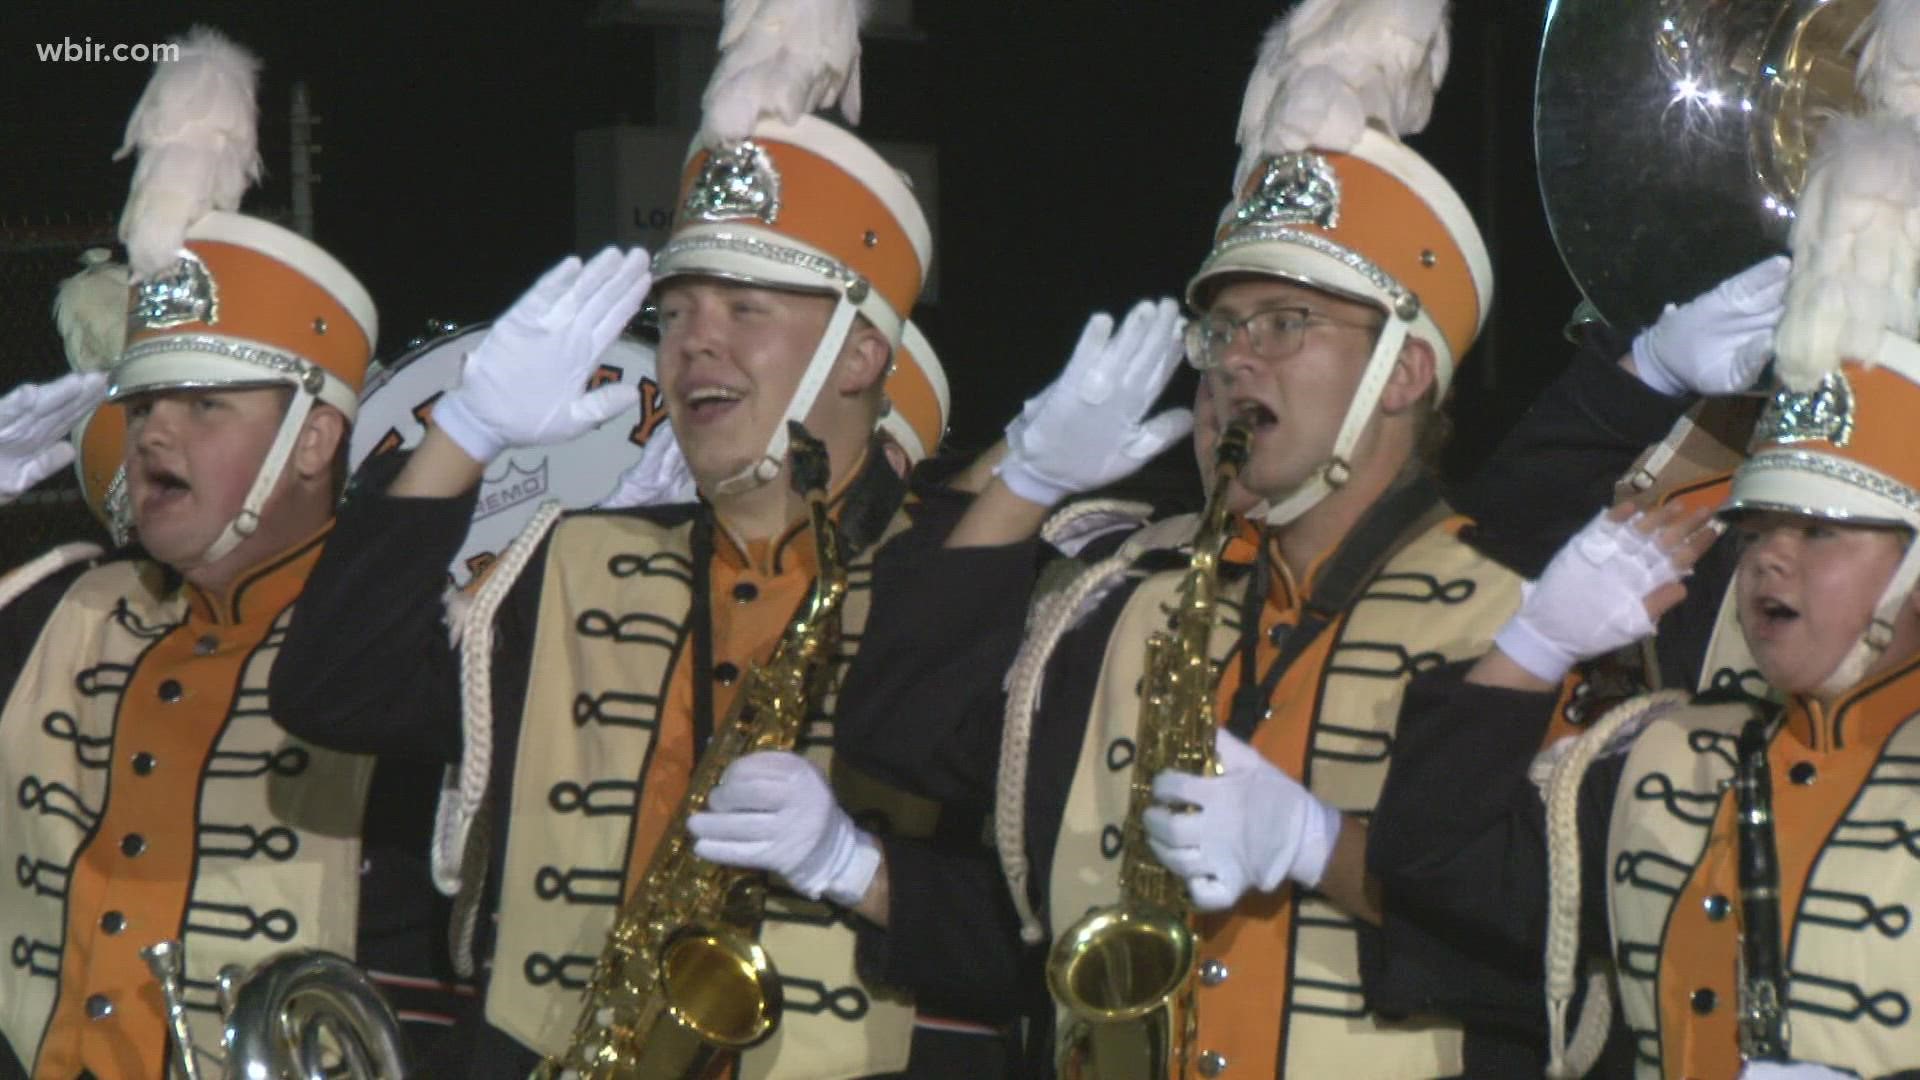 Listen as the Pride of the Southland Marching Band performs at WBIR.